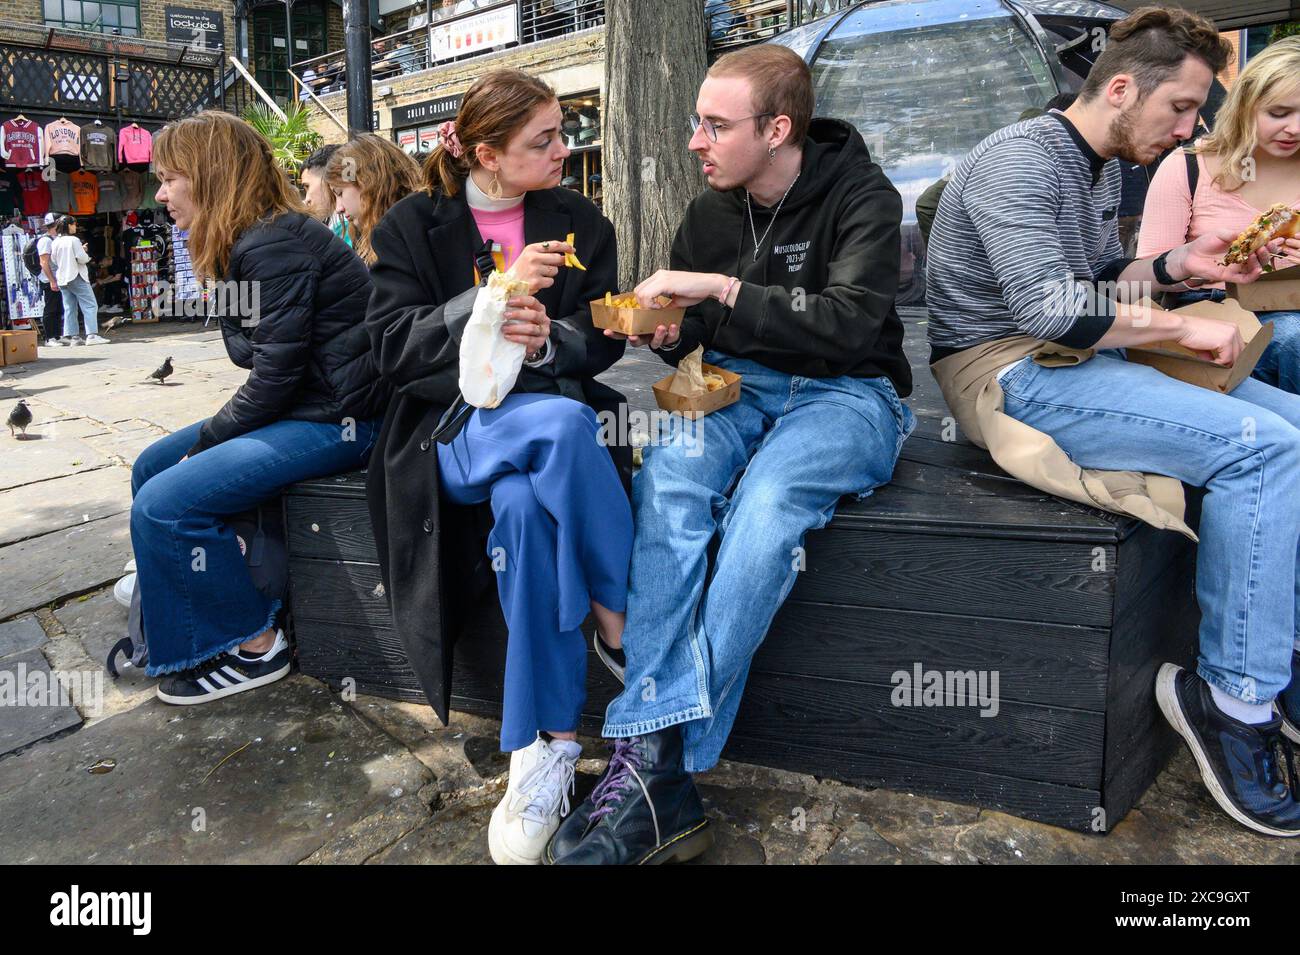 London, UK. People eating and talking in Camden Market [no model release] Stock Photo